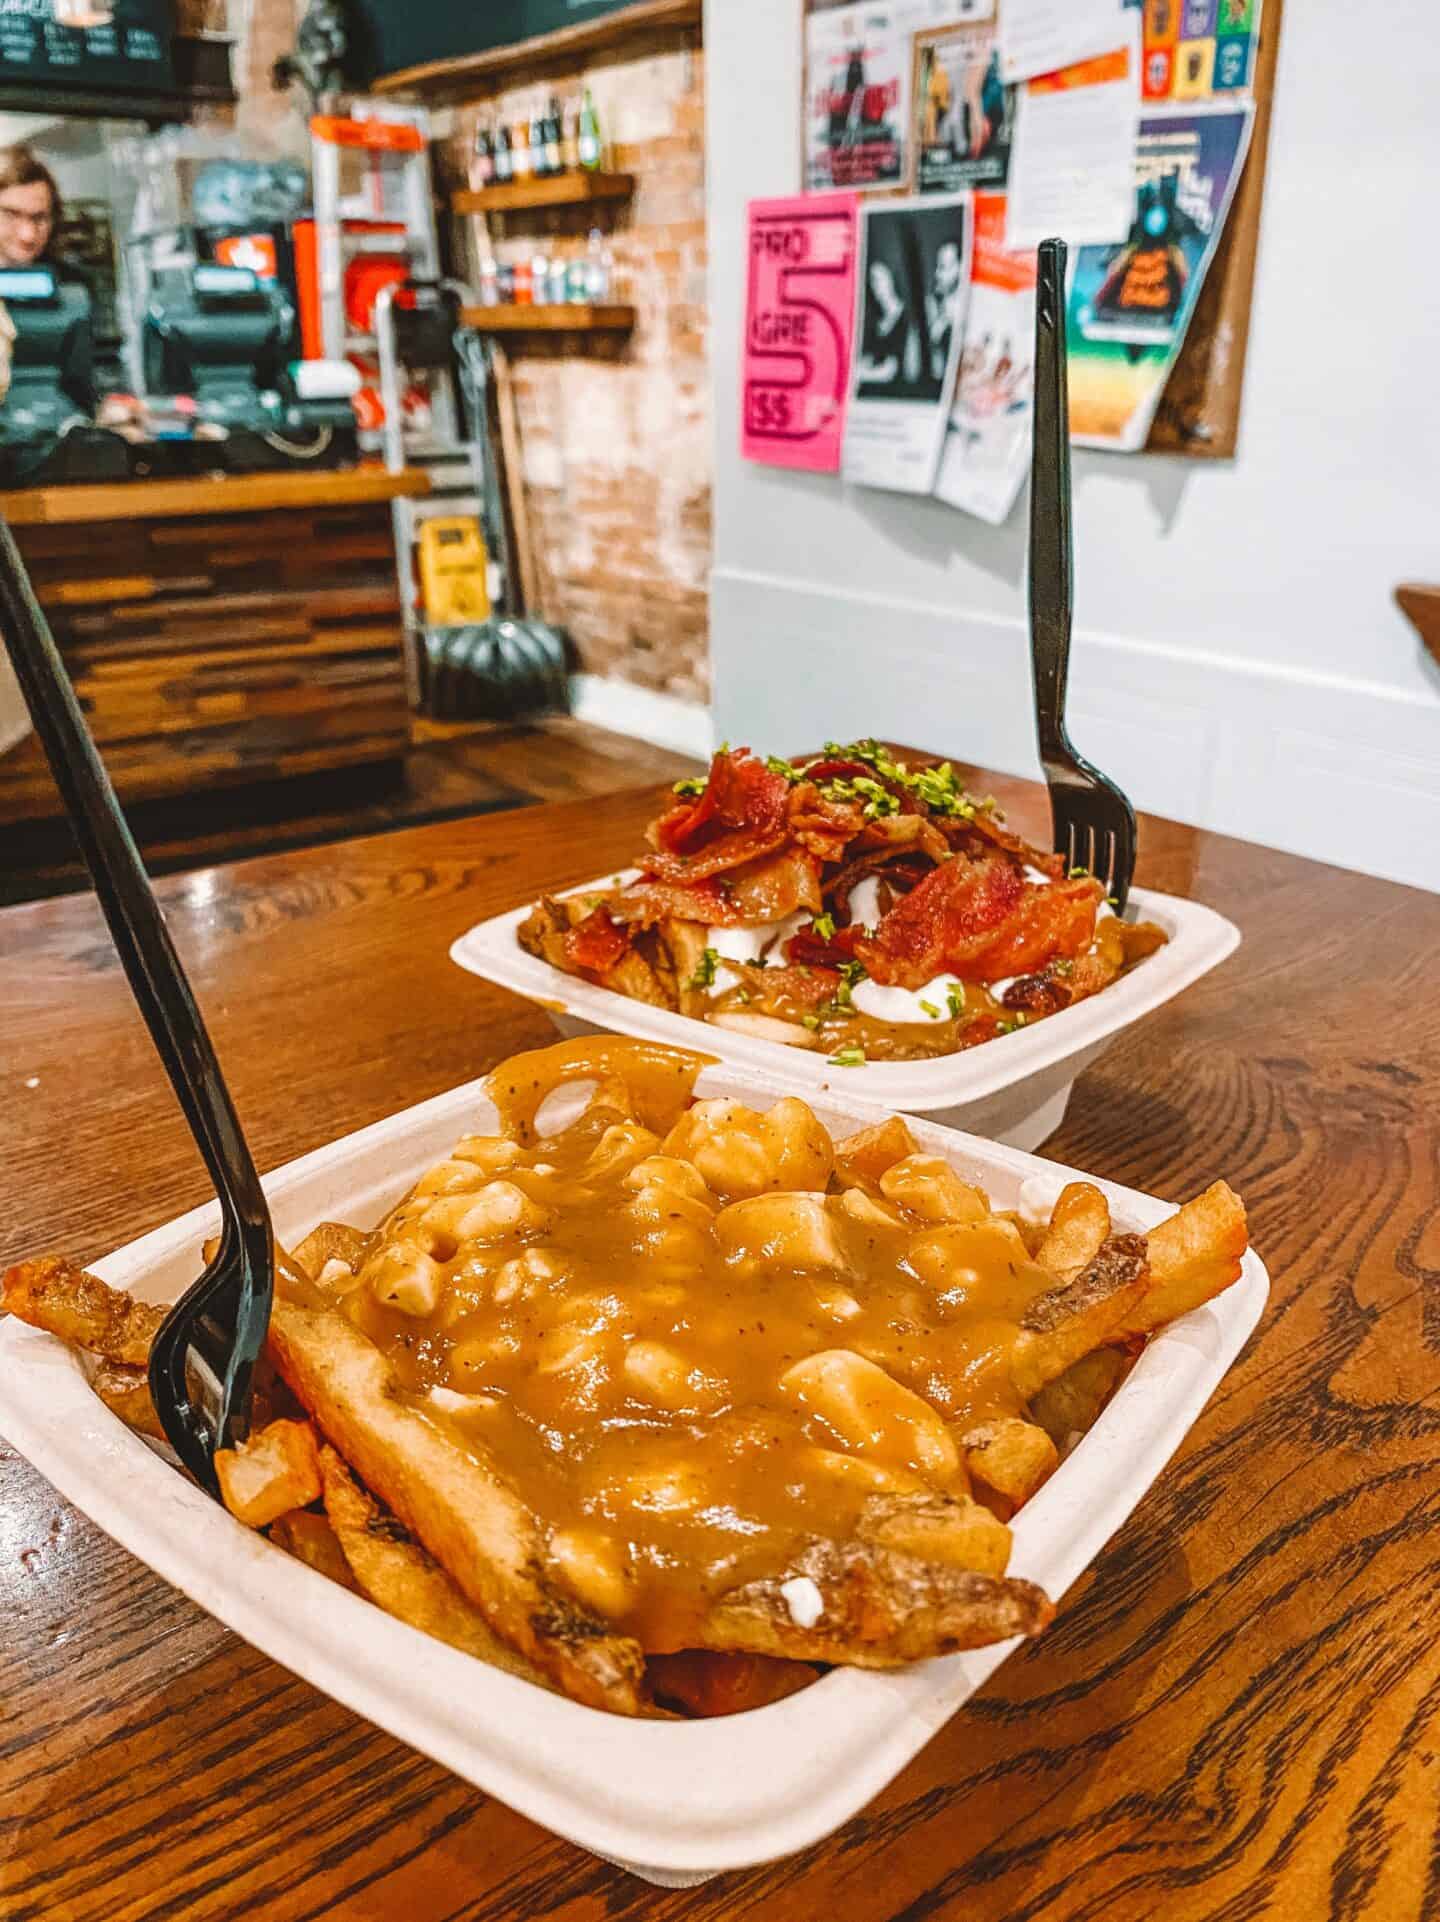 Two heaping helpings of poutine from Poutini's House of Poutine in Toronto's liberty village 